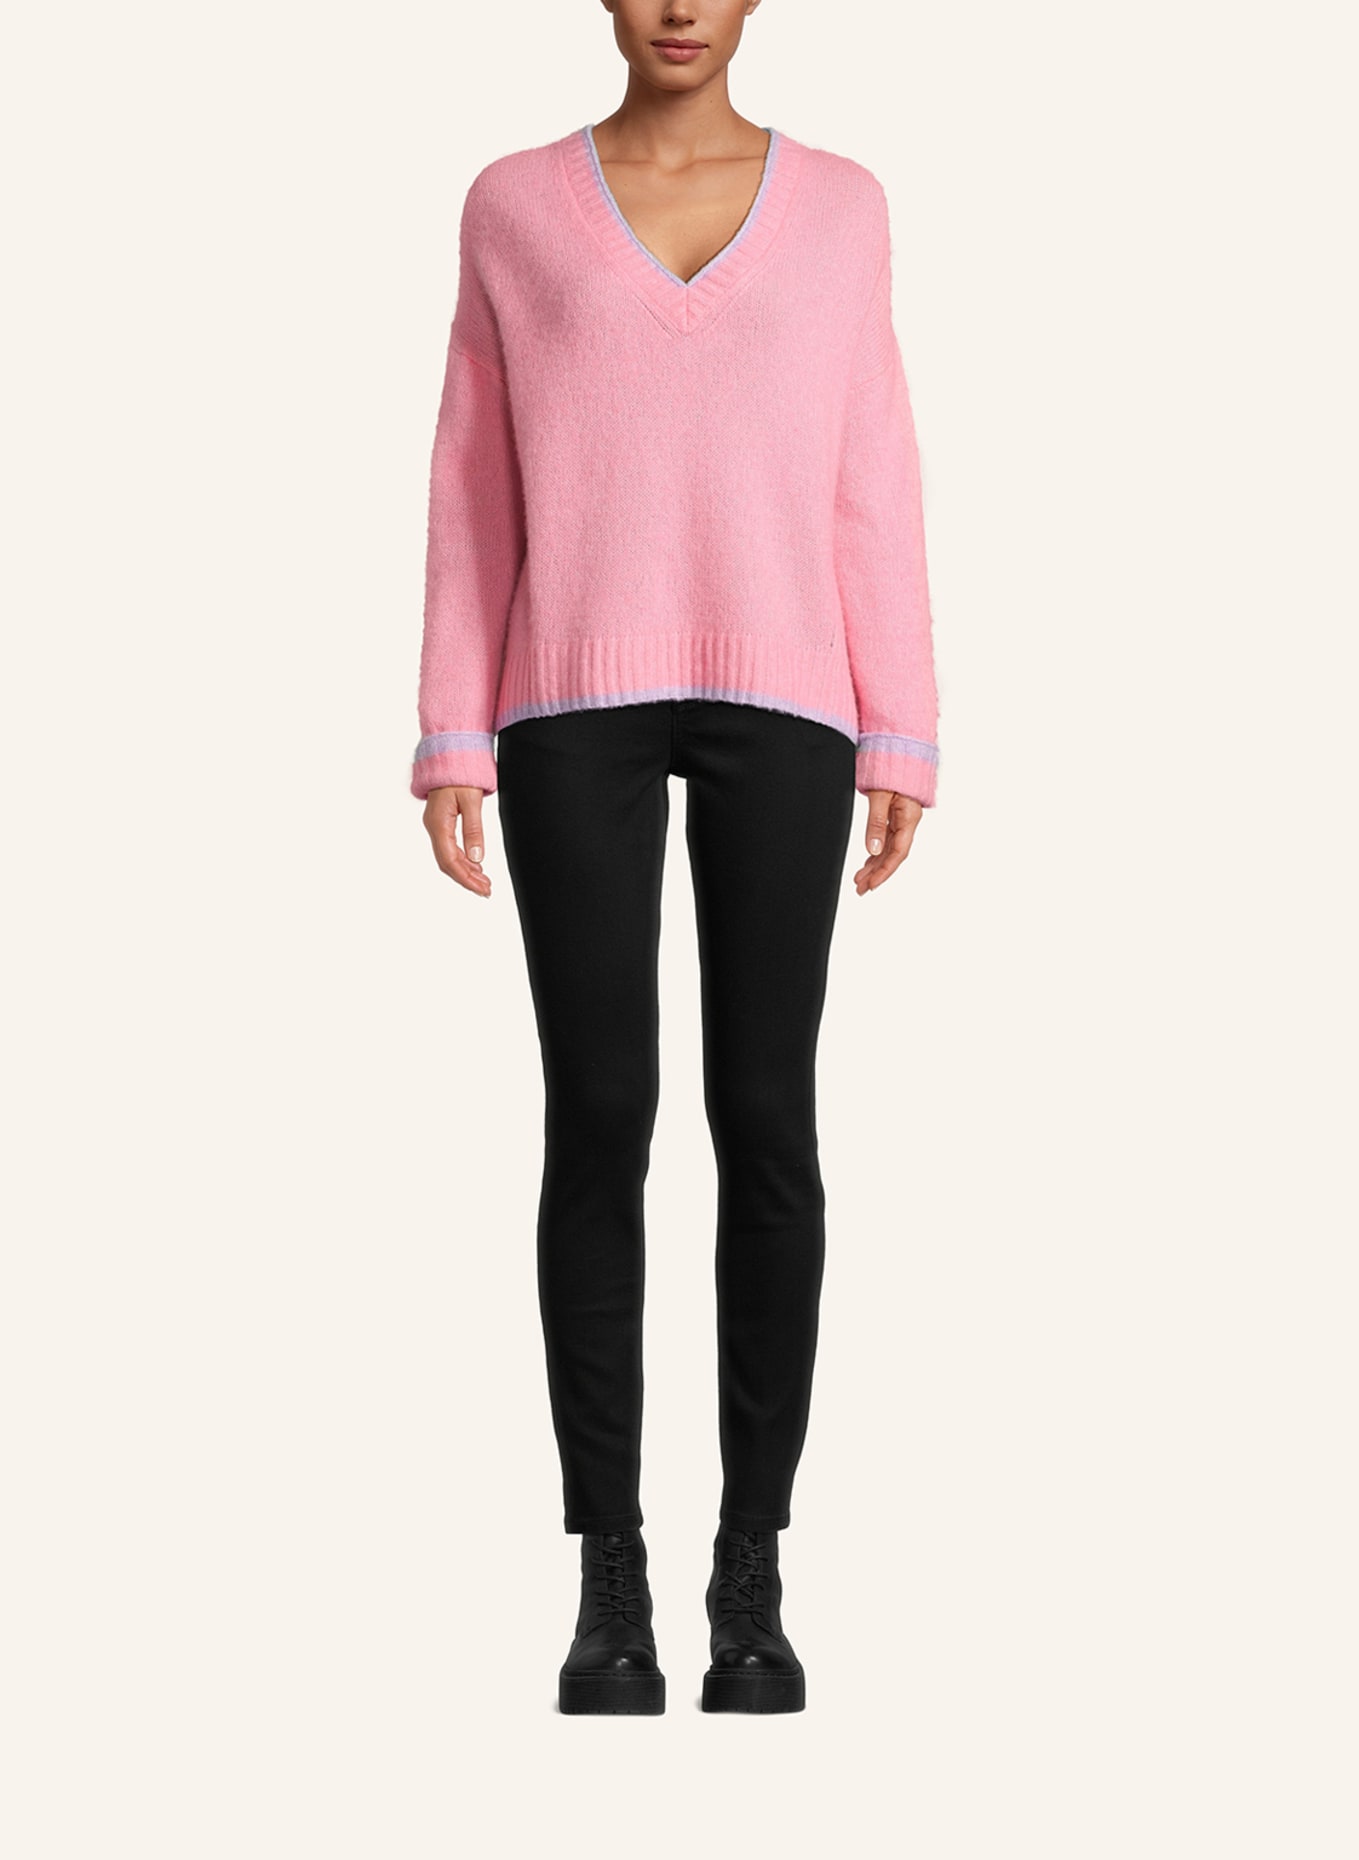 Princess GOES HOLLYWOOD Pullover mit Cashmere, Farbe: PINK (Bild 4)